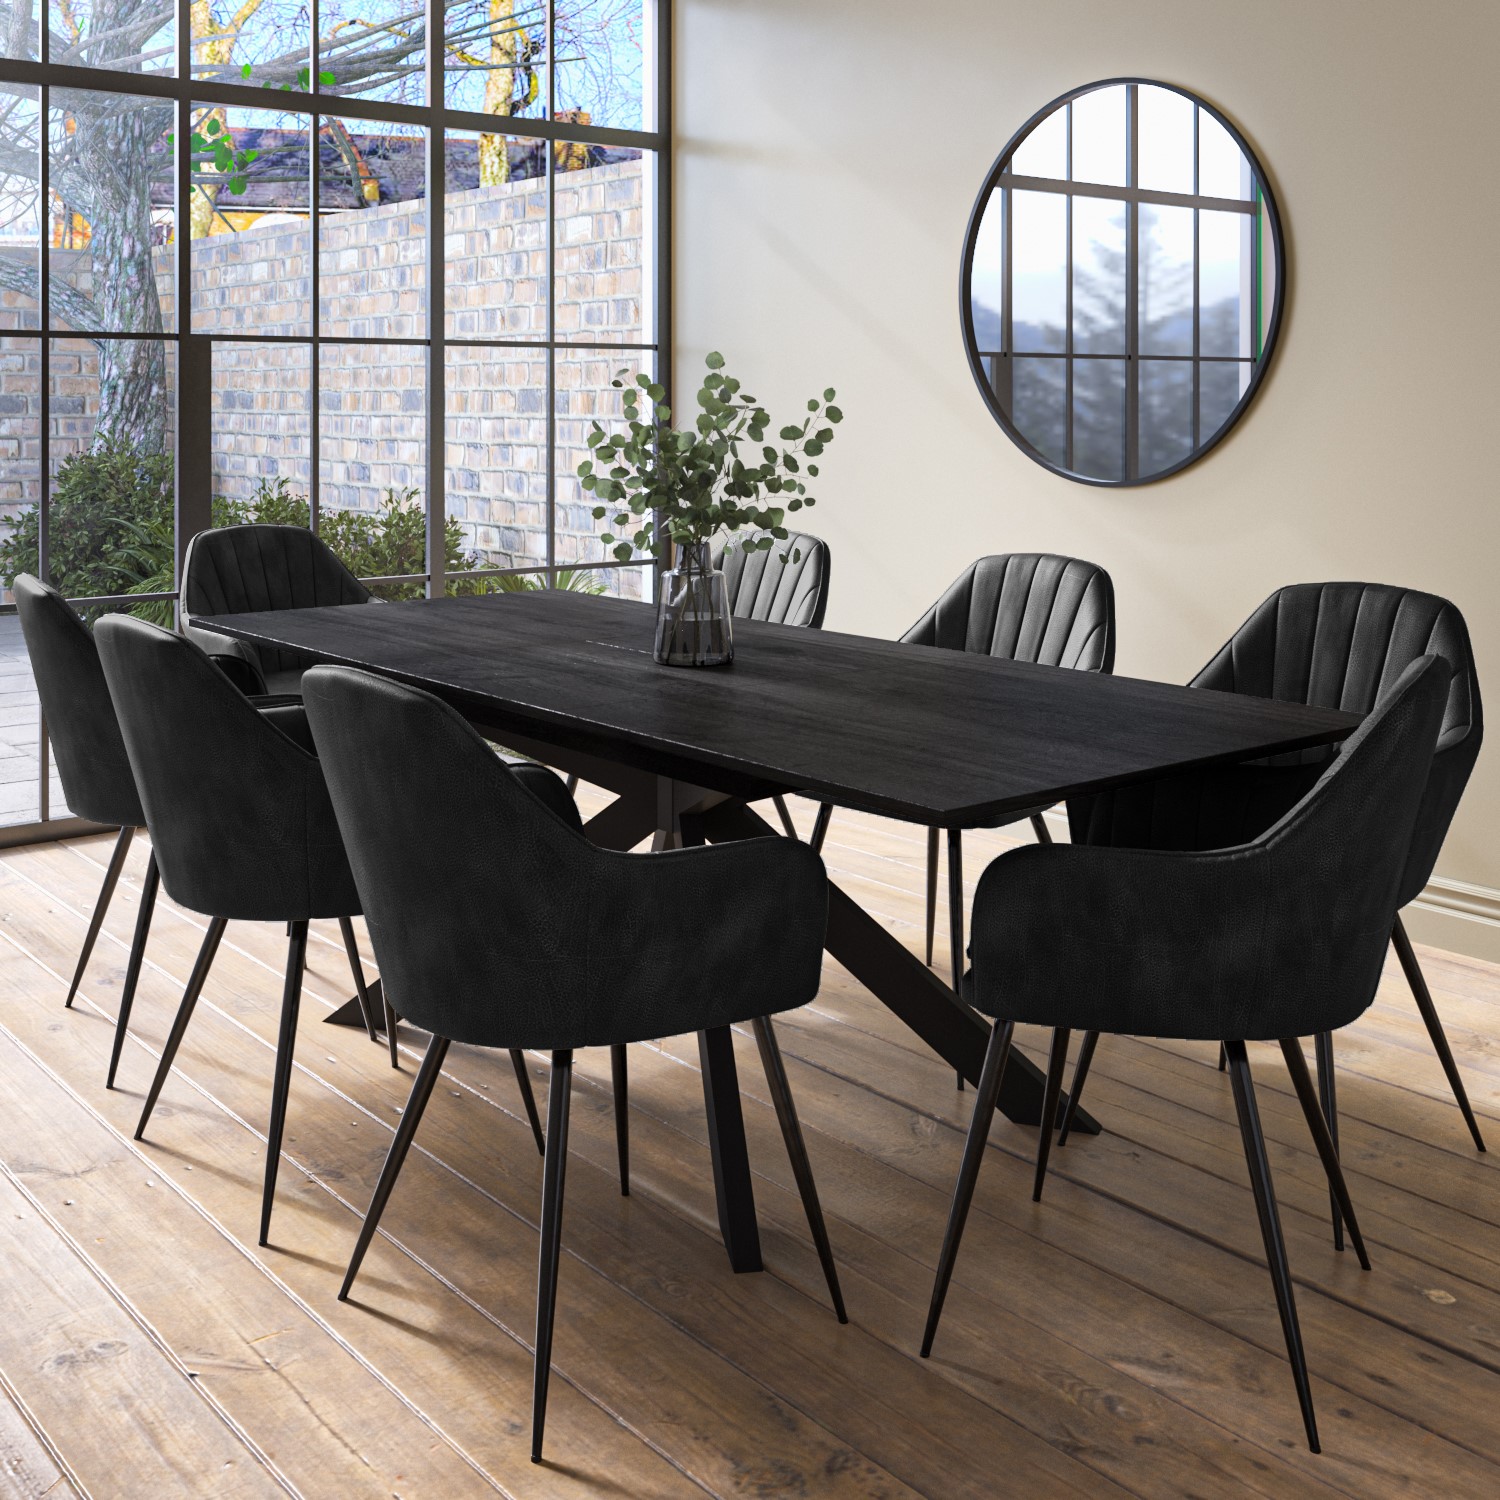 Photo of Extendable black dining table with 8 black faux leather dining chairs - carson